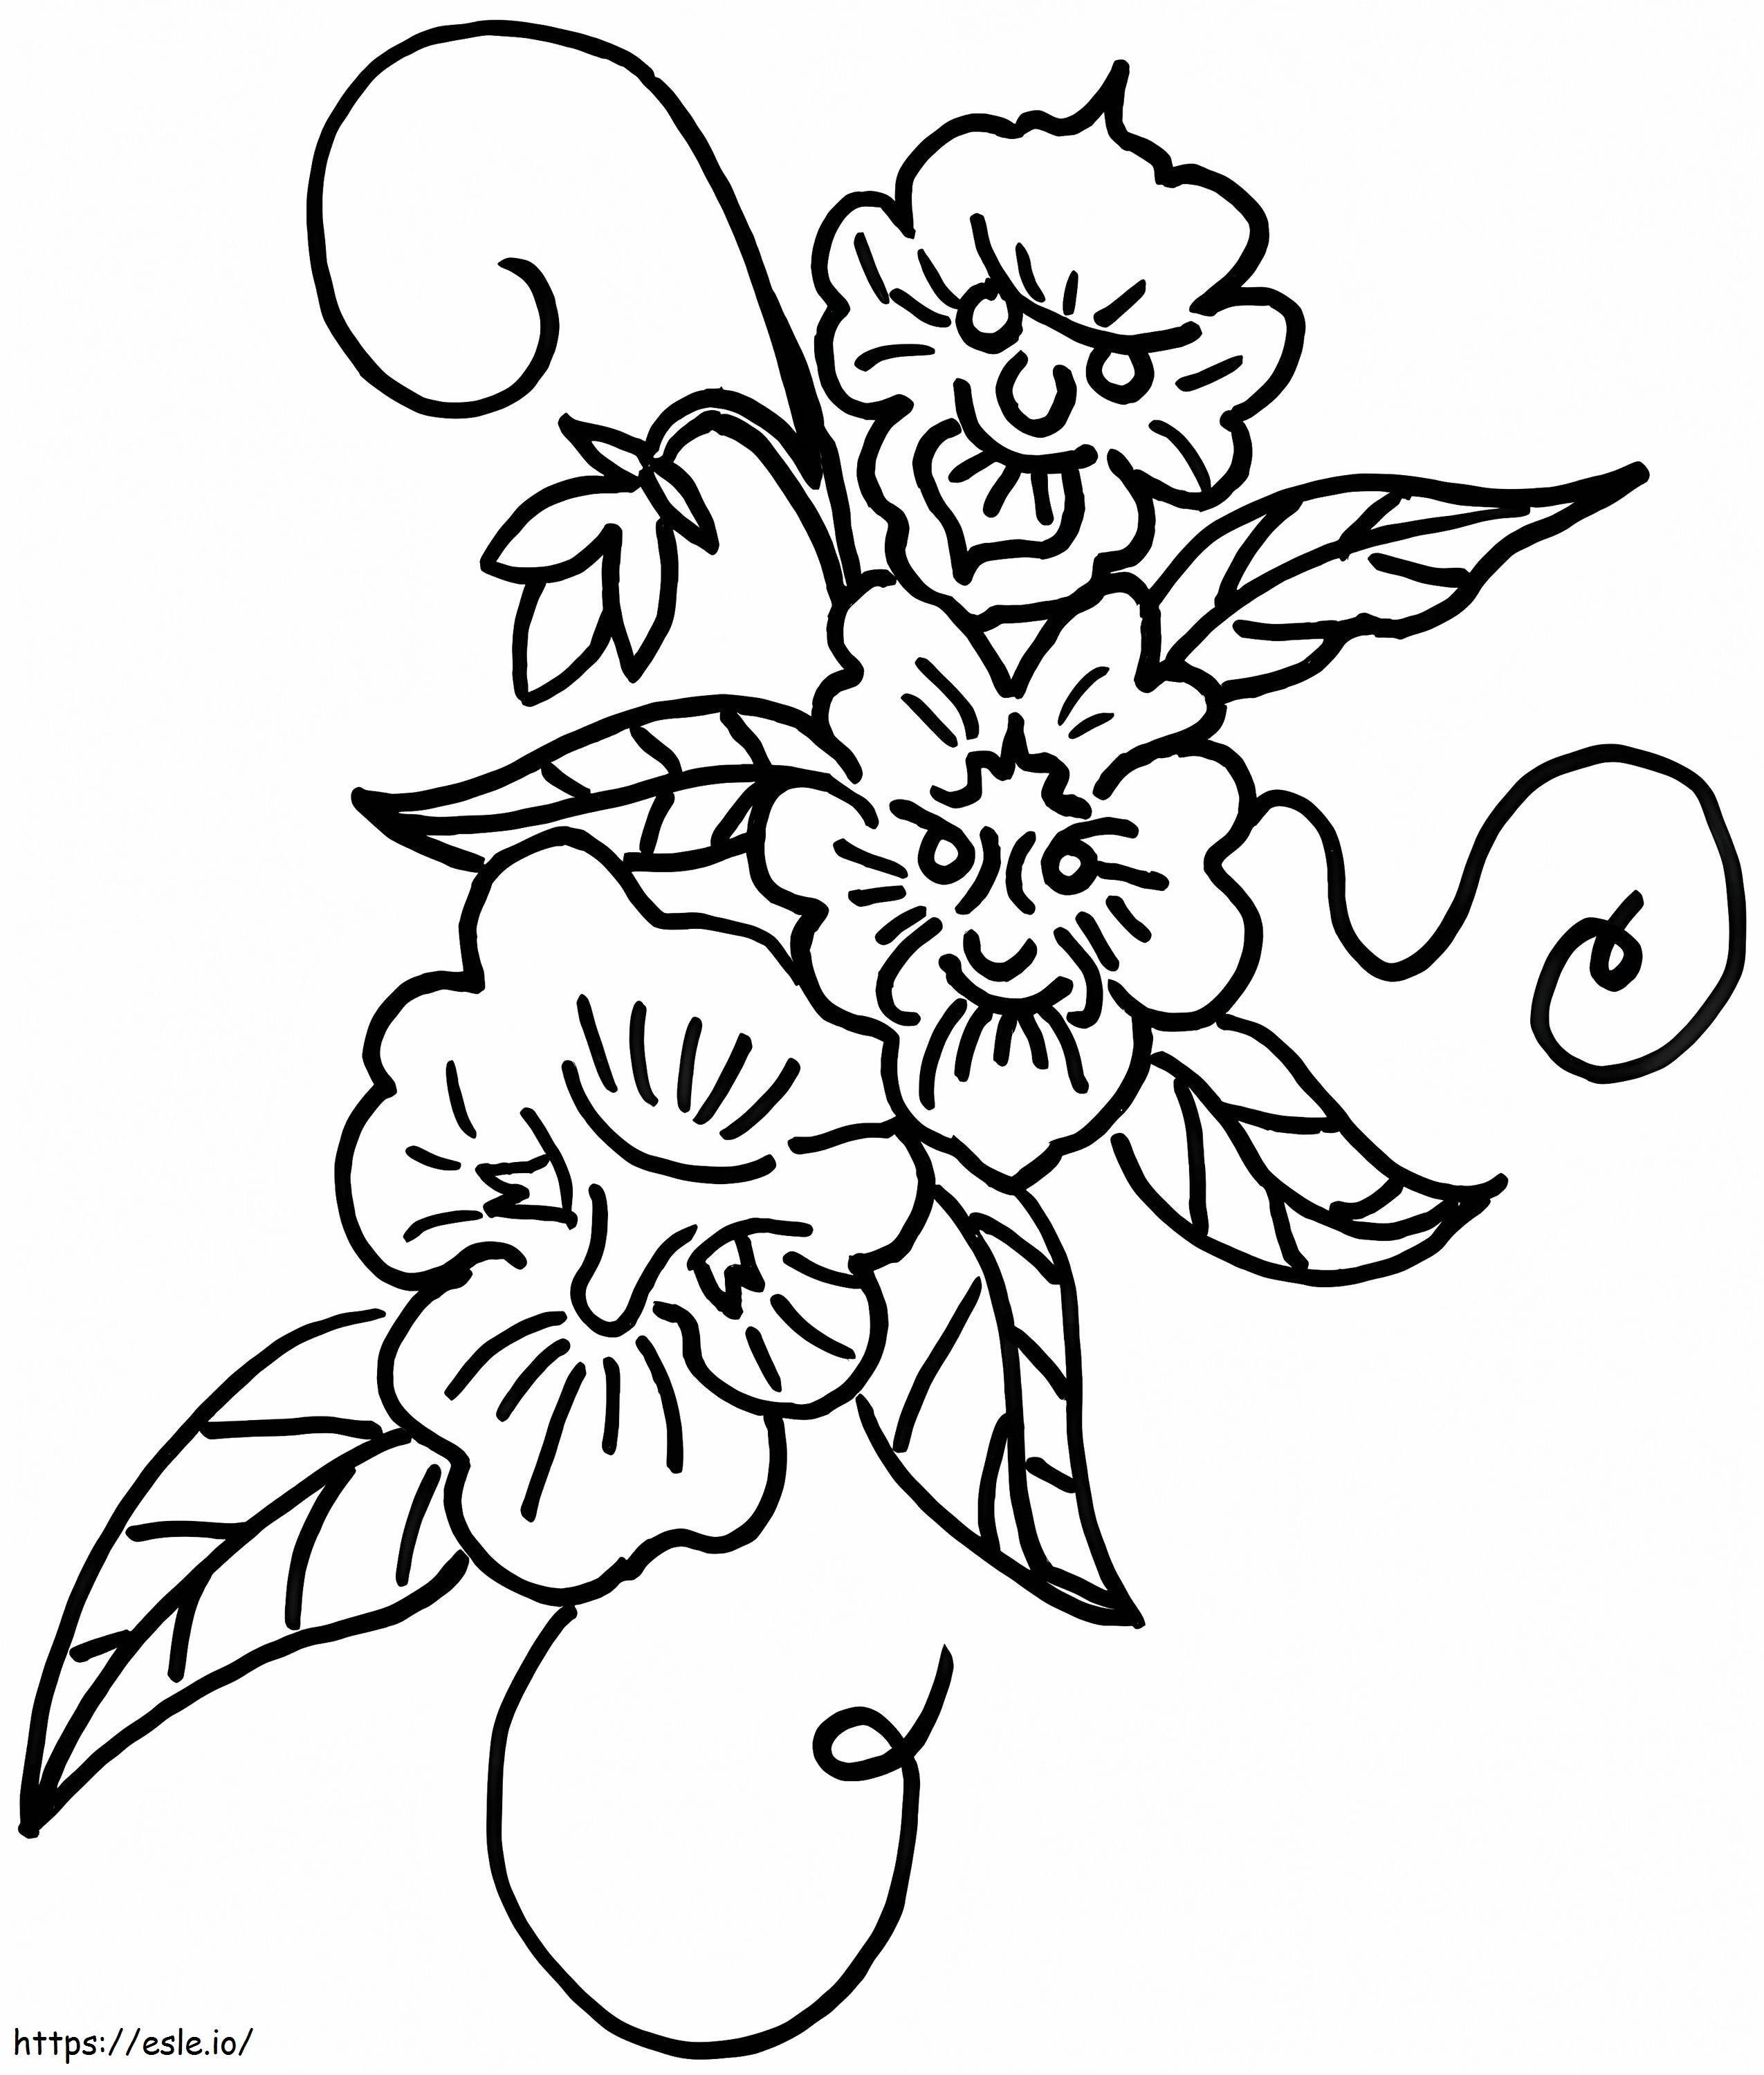 Flower Of Violets 2 coloring page